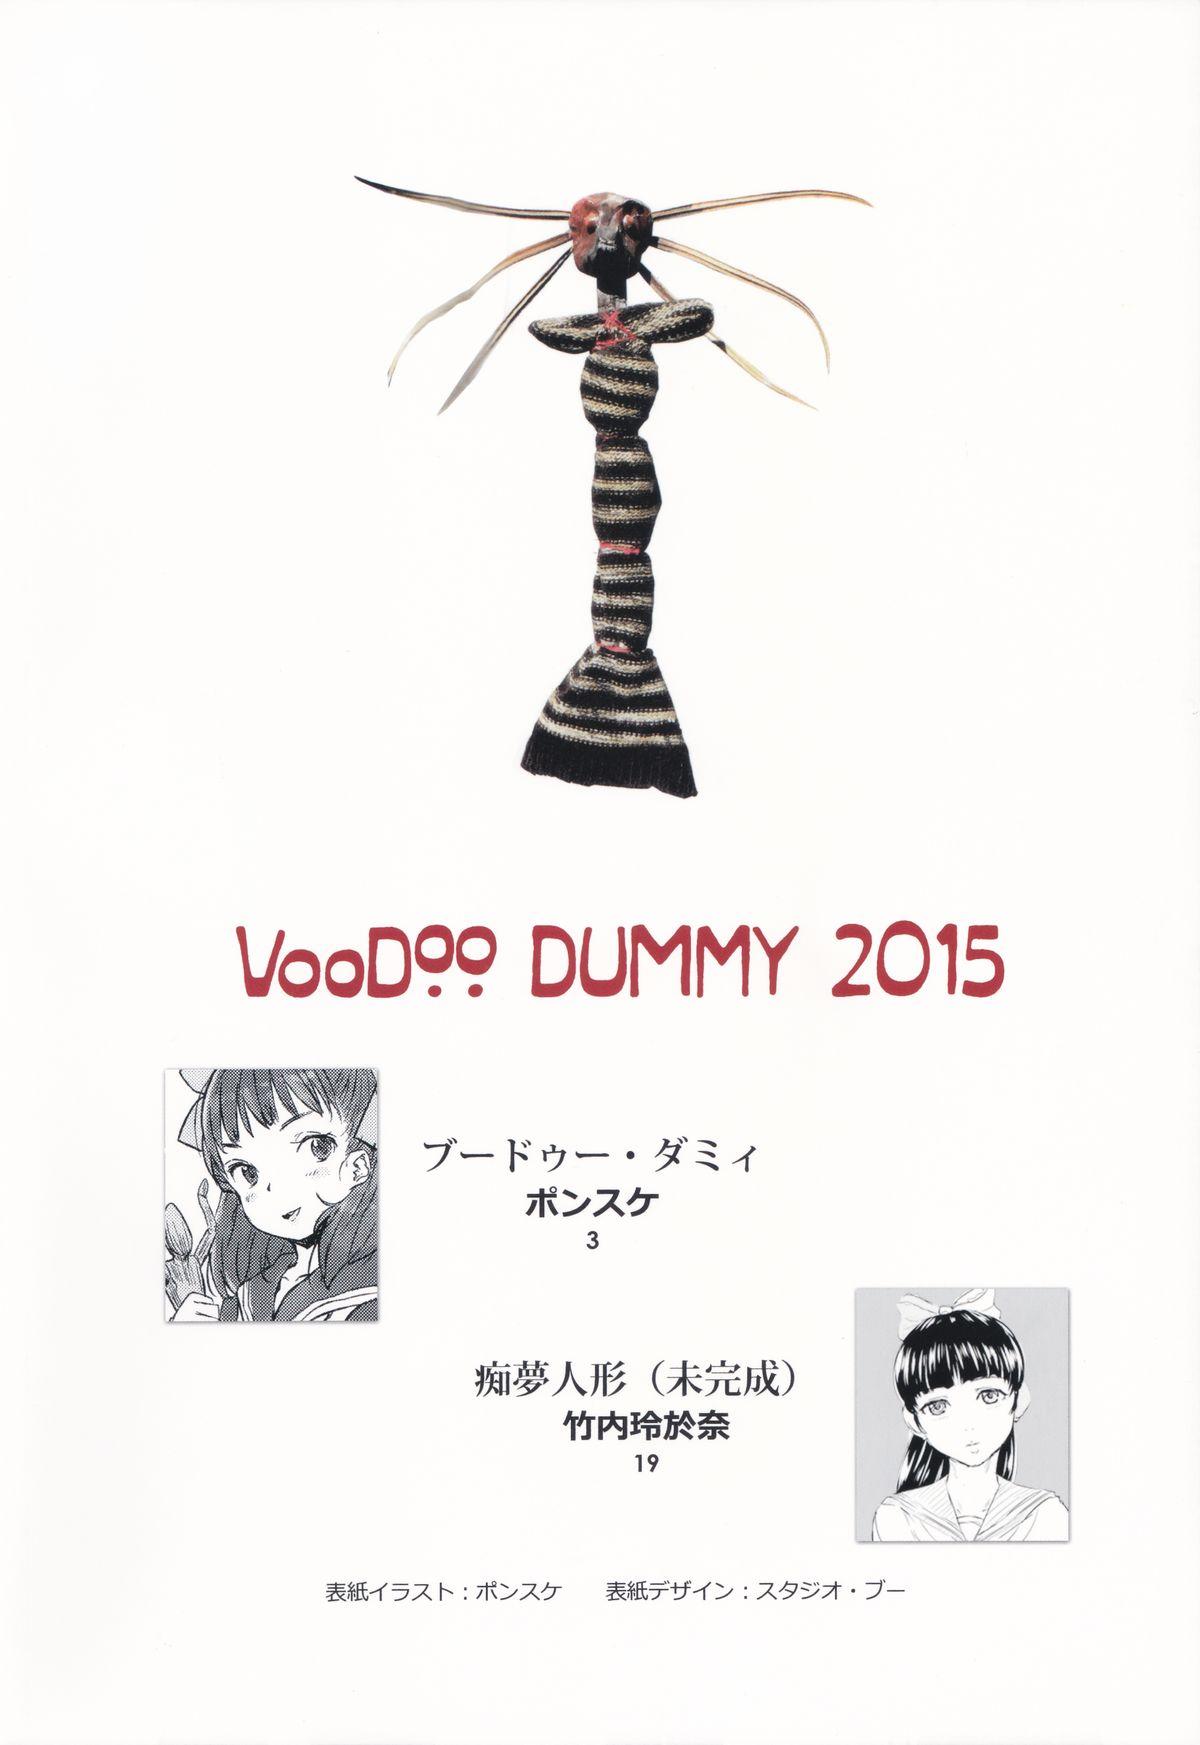 Lolicon Voodoo Dummy 2015 Best Blow Job - Page 3